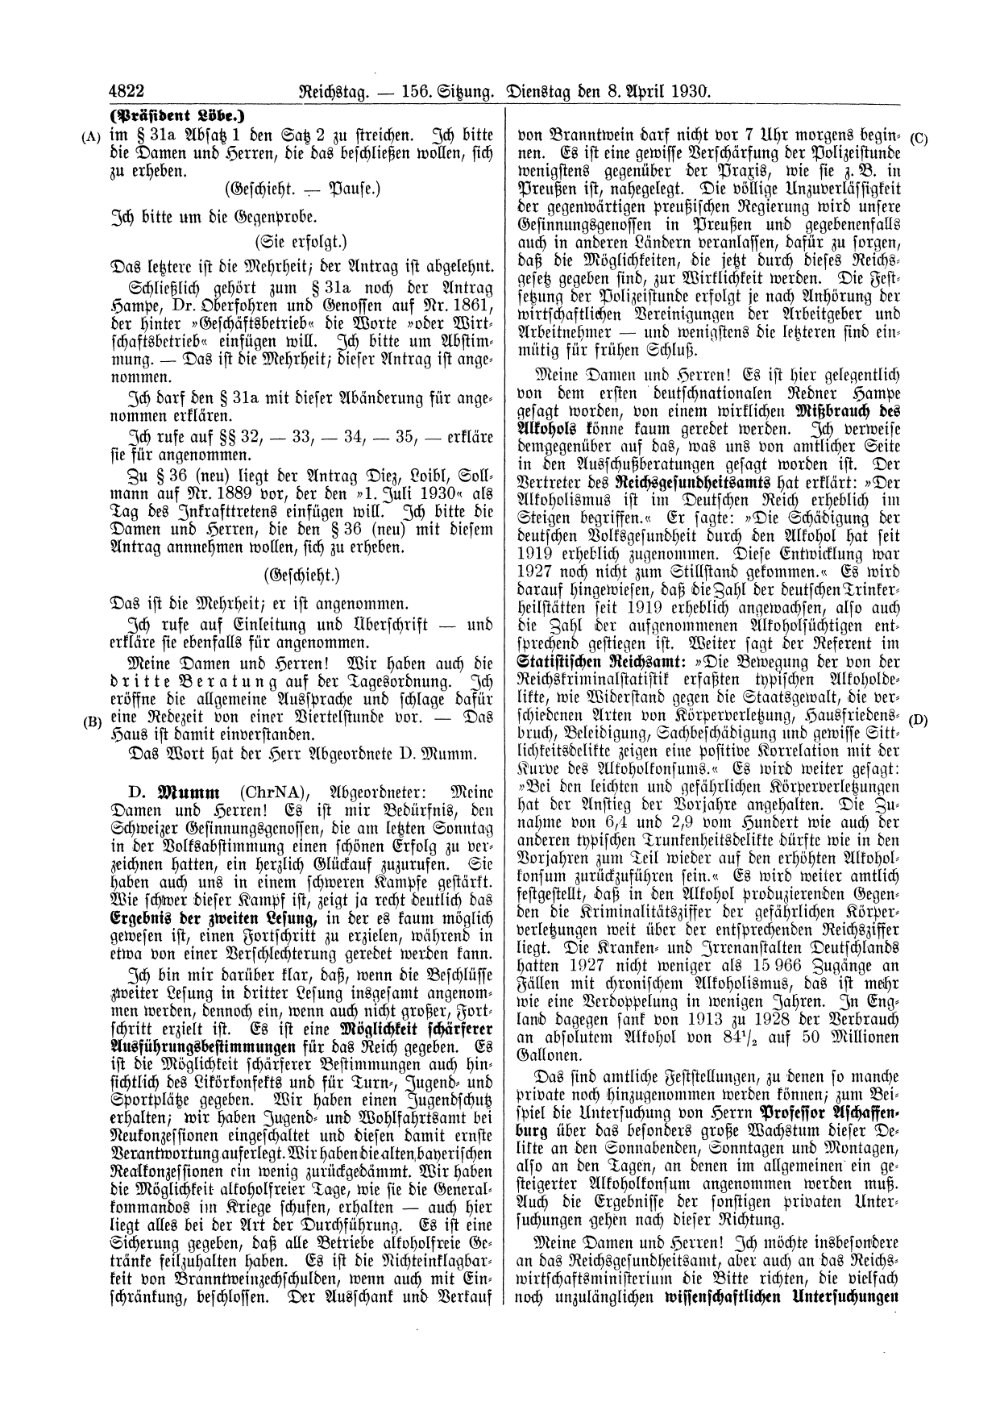 Scan of page 4822